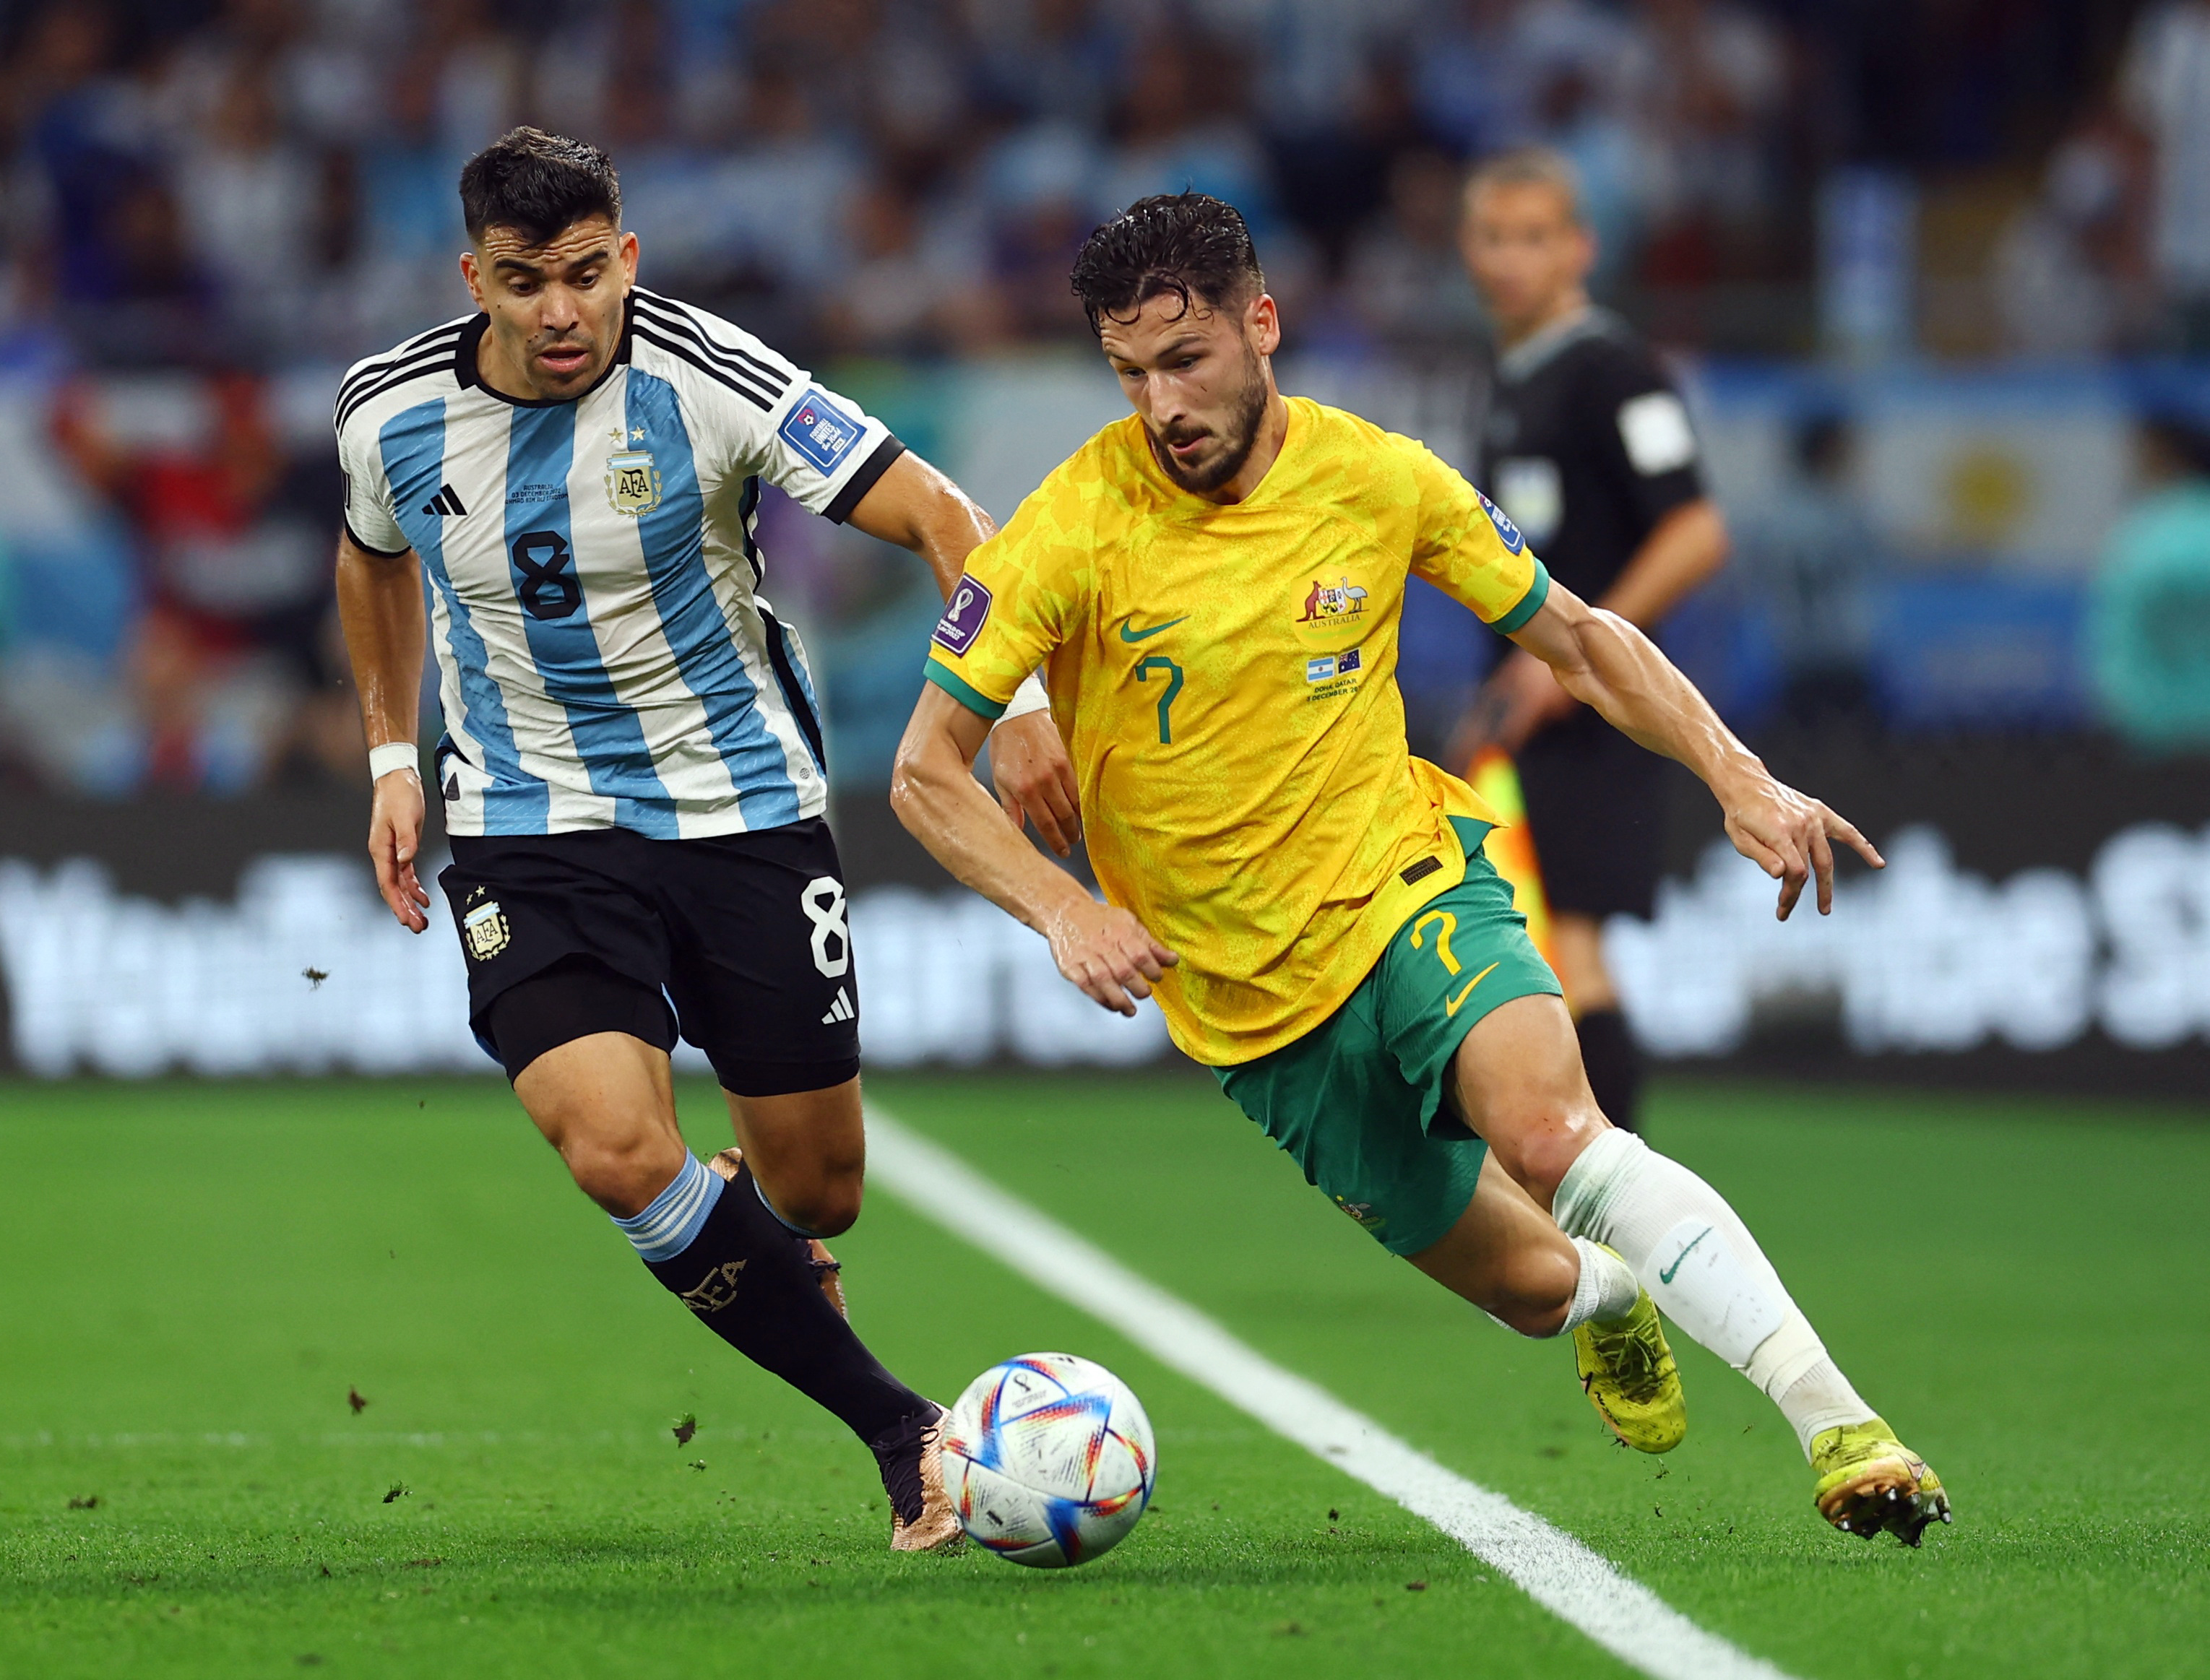 Argentina vs Australia live online: Australia playing their way into it, score, stats and updates | Qatar World Cup 2022